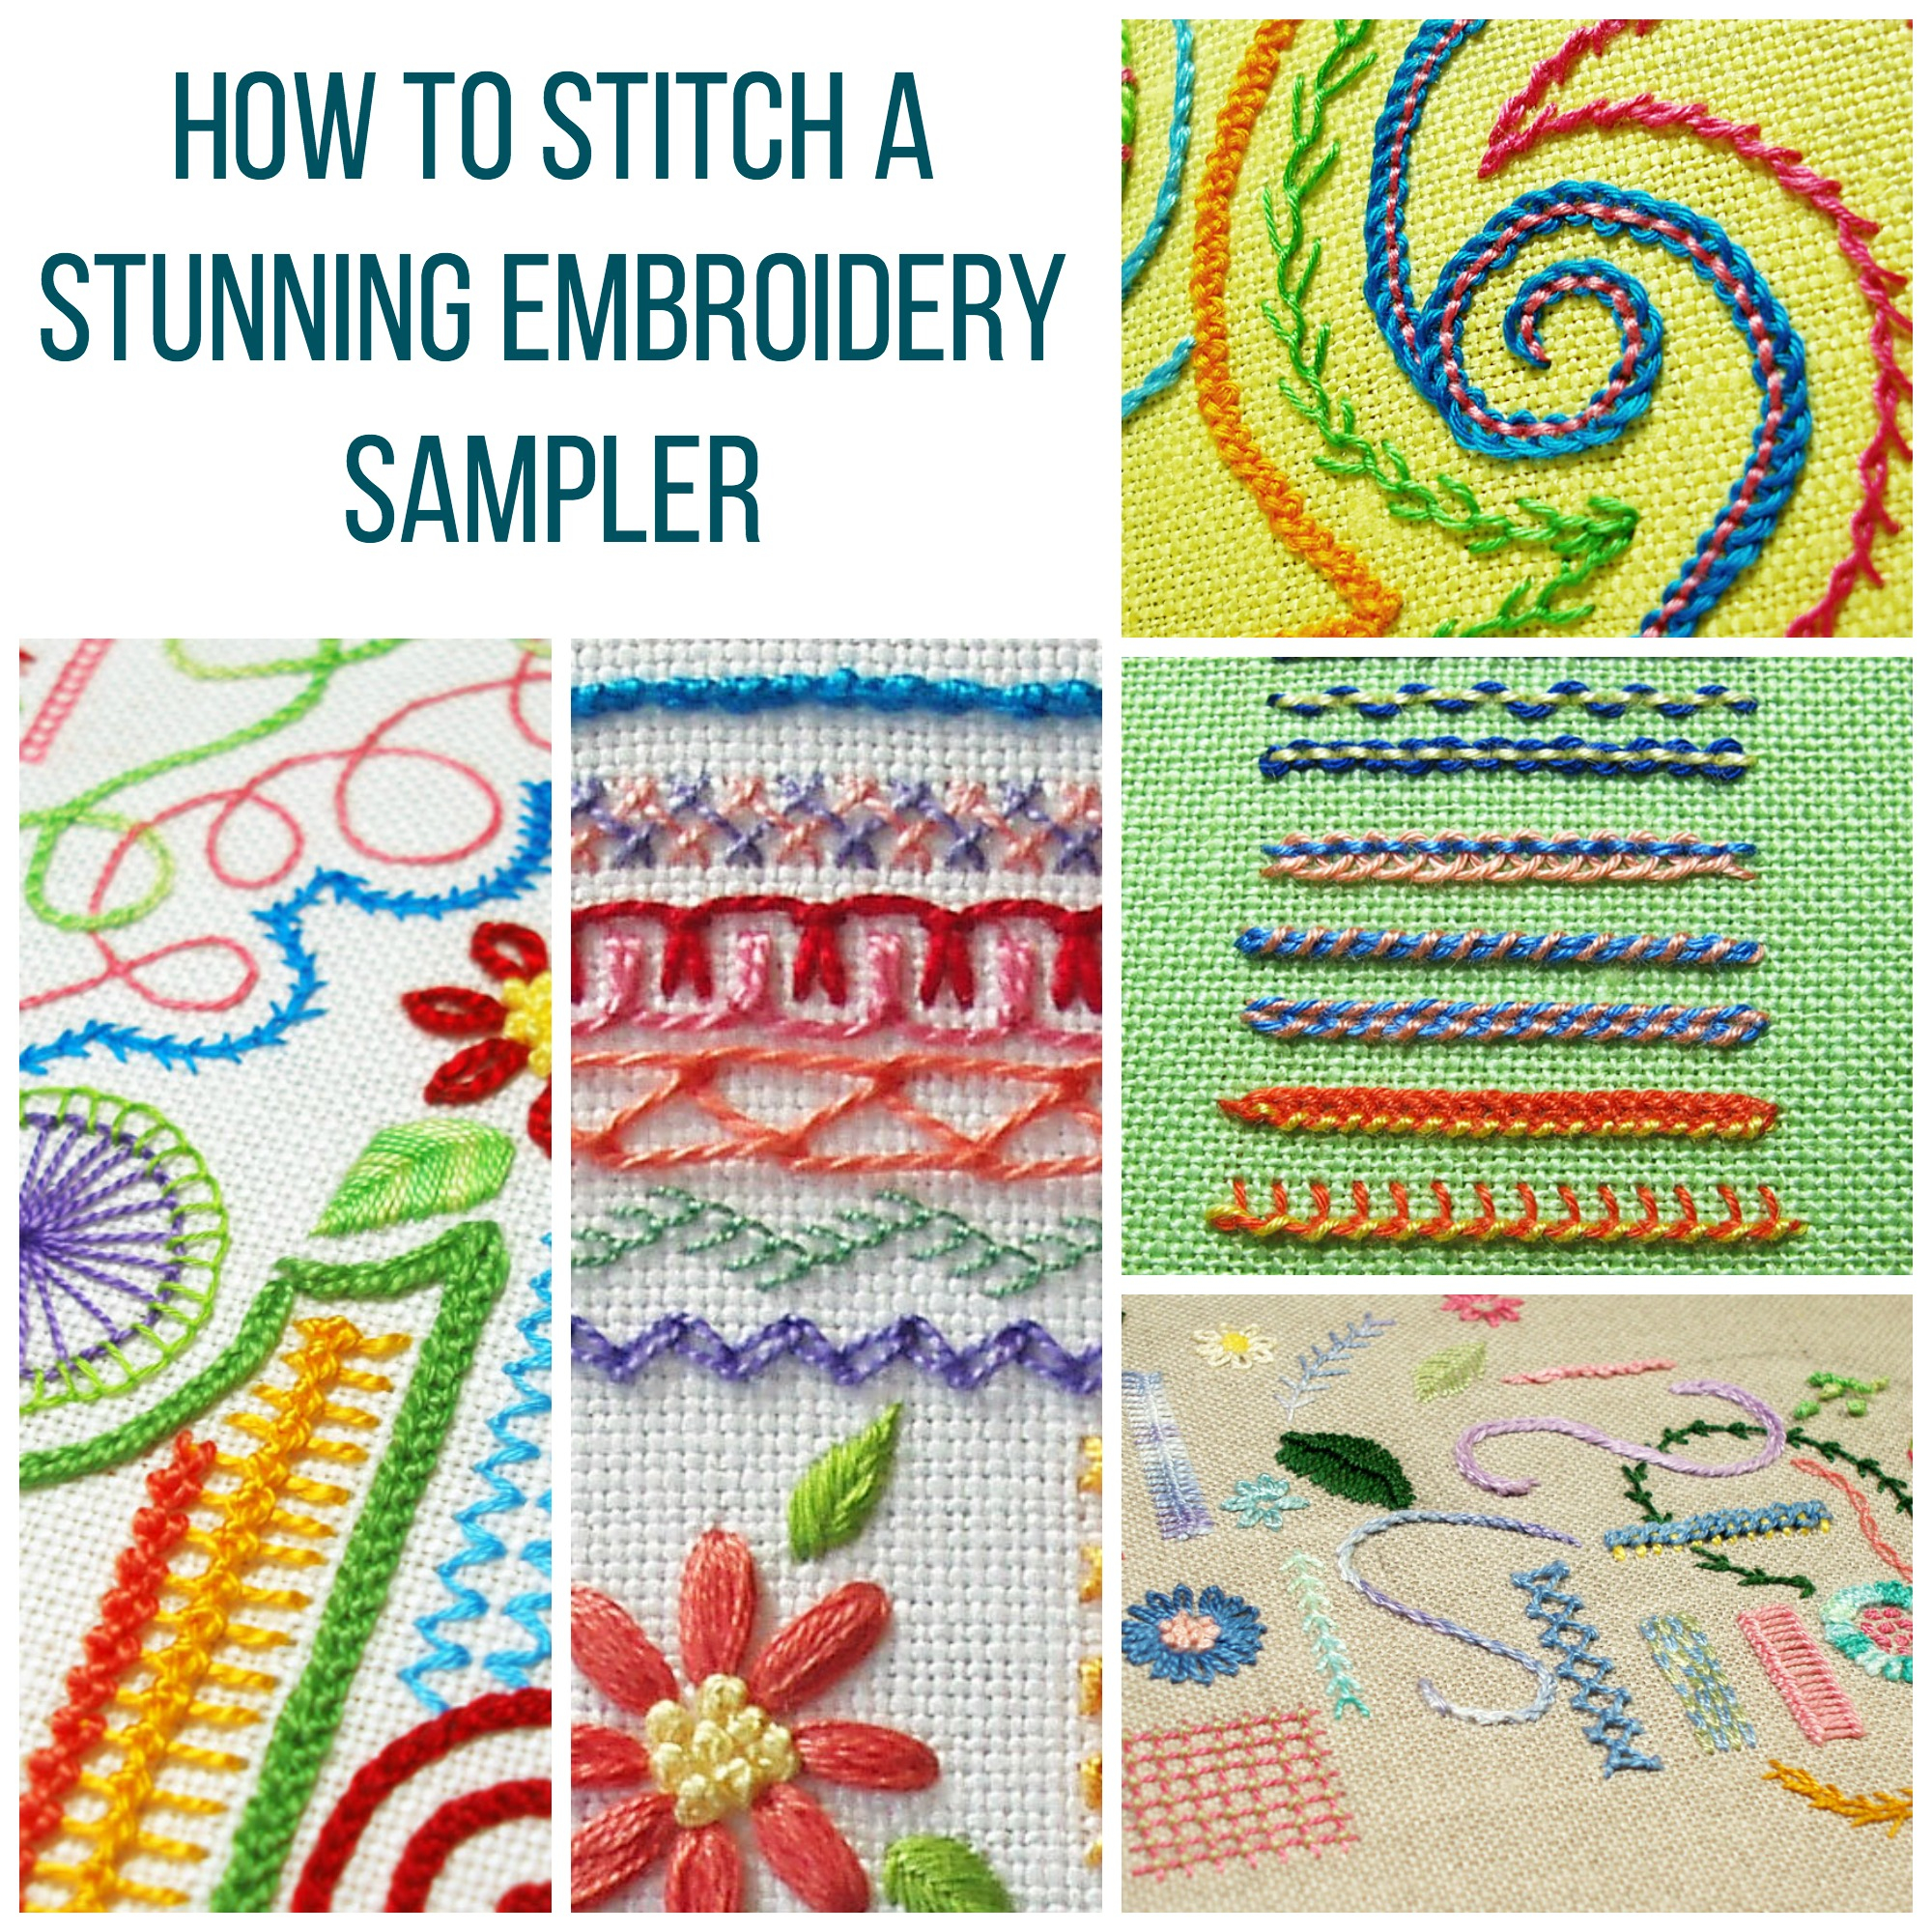 Free Crewel Embroidery Patterns Show Off Your Stitching With A Stunning Embroidery Sampler